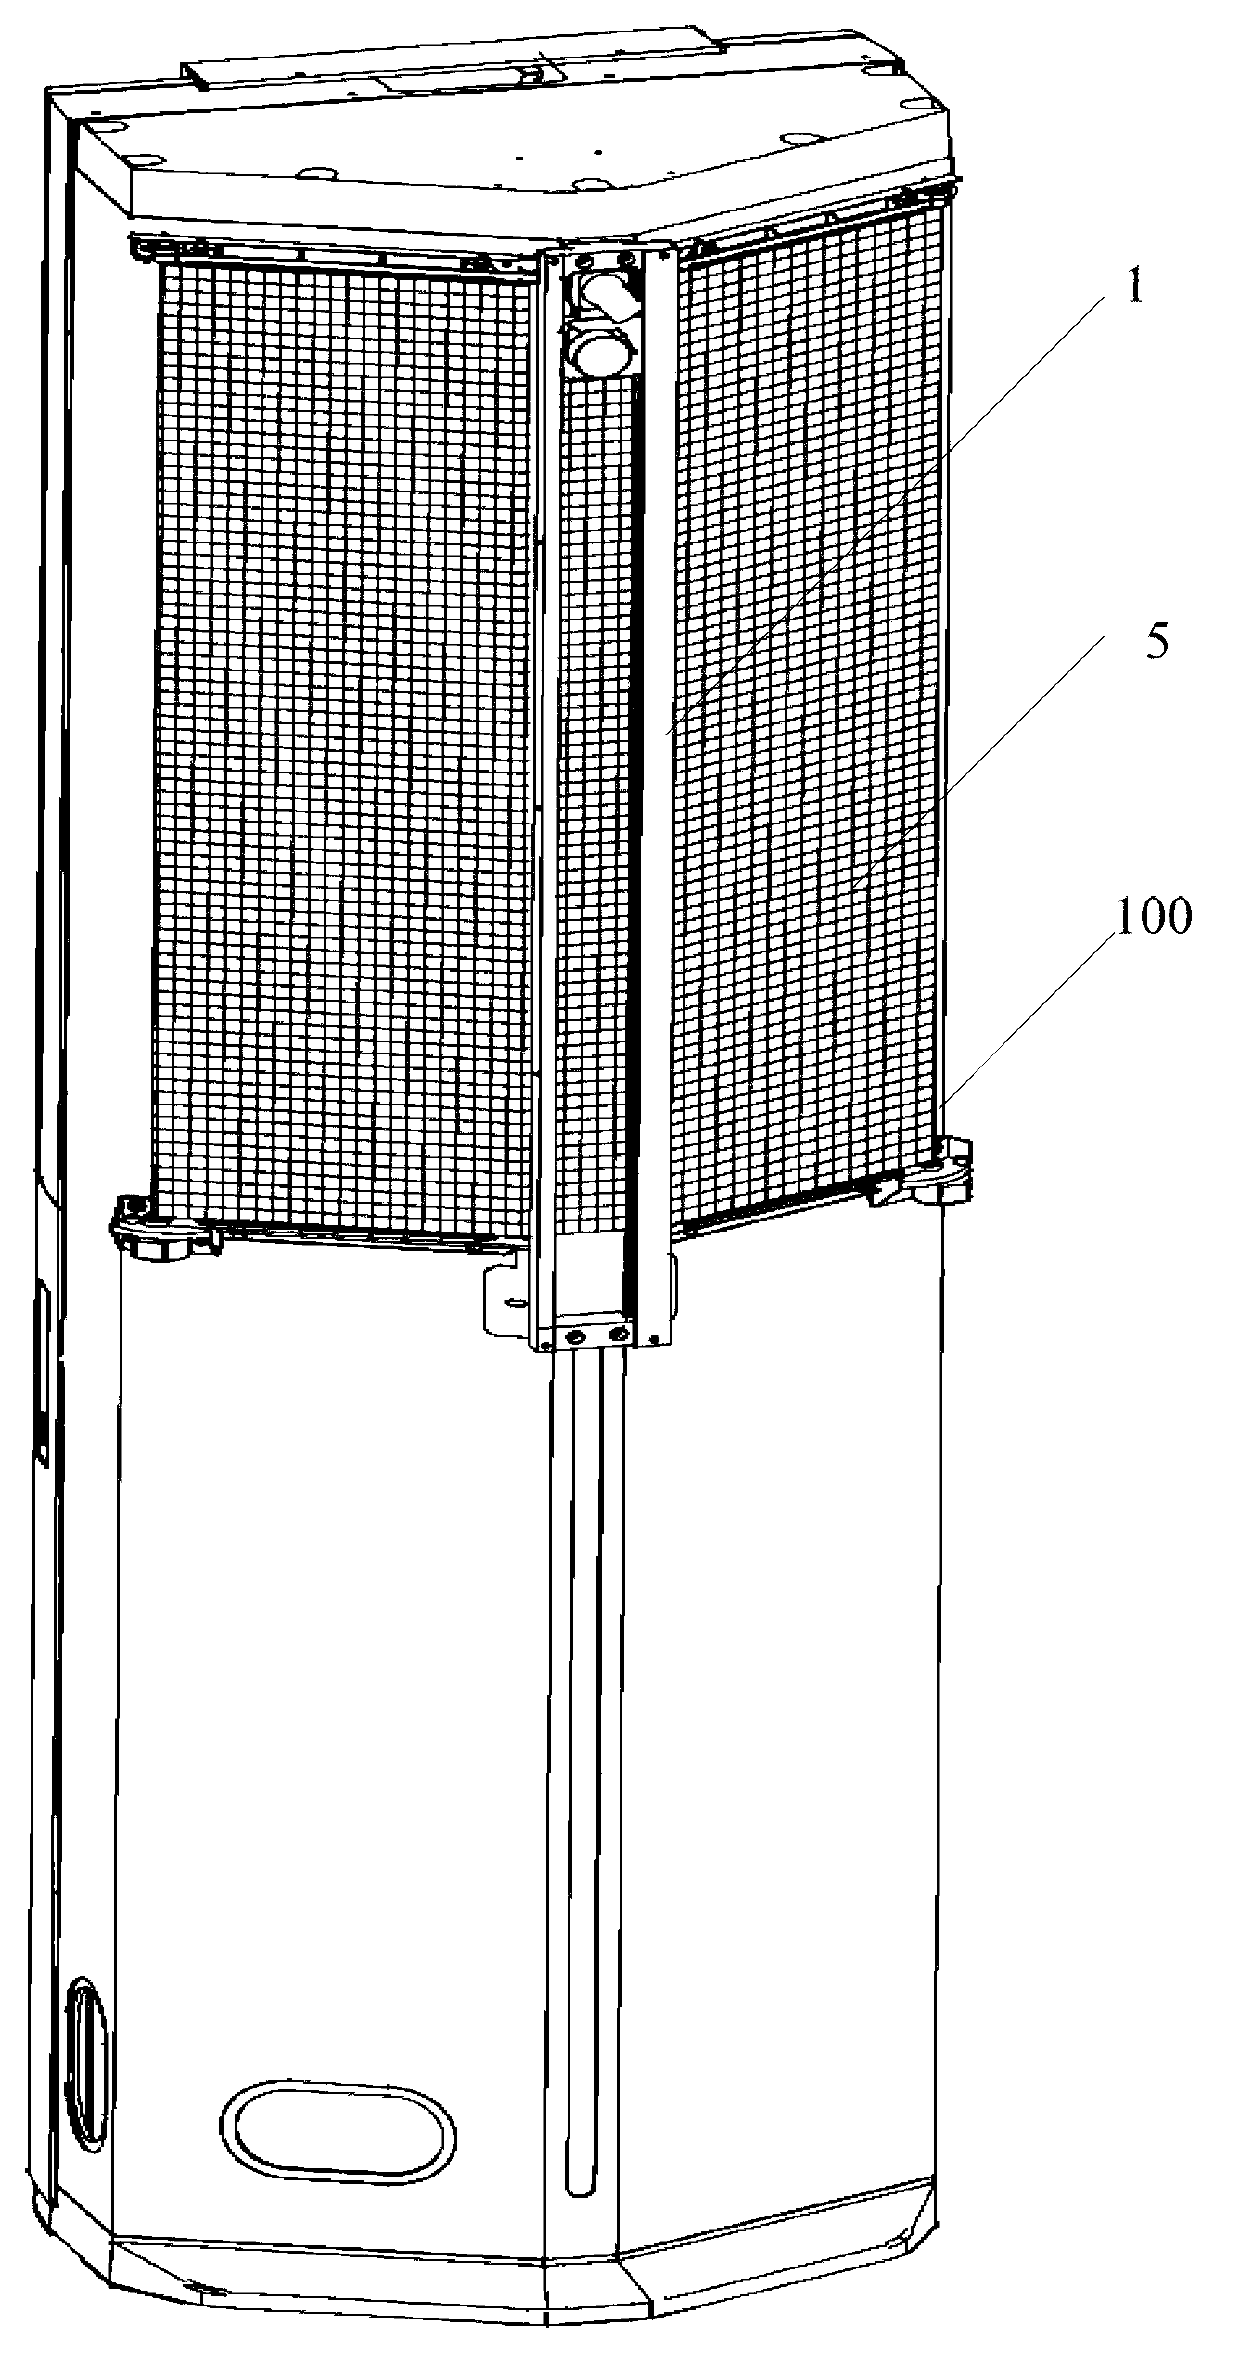 Filter screen cleaning device and air conditioner indoor unit